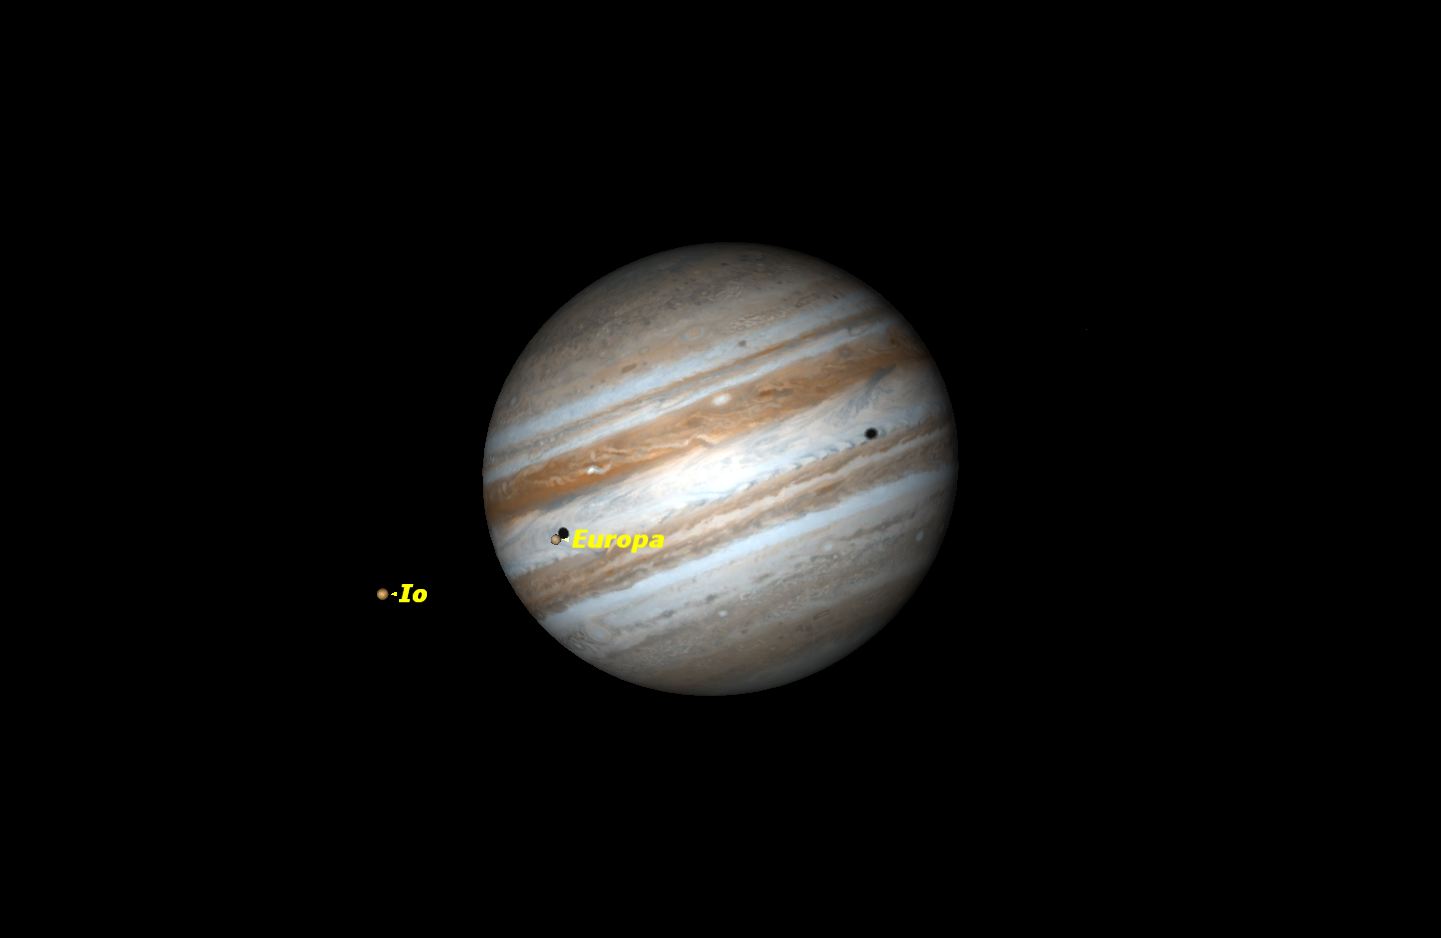 On the night of Monday, December 15, we will see another of the current series of double shadow crossings on Jupiter. The moons Io and Europa will cast their shadows on opposite limbs of the giant planet. Credit: Starry Night Software.